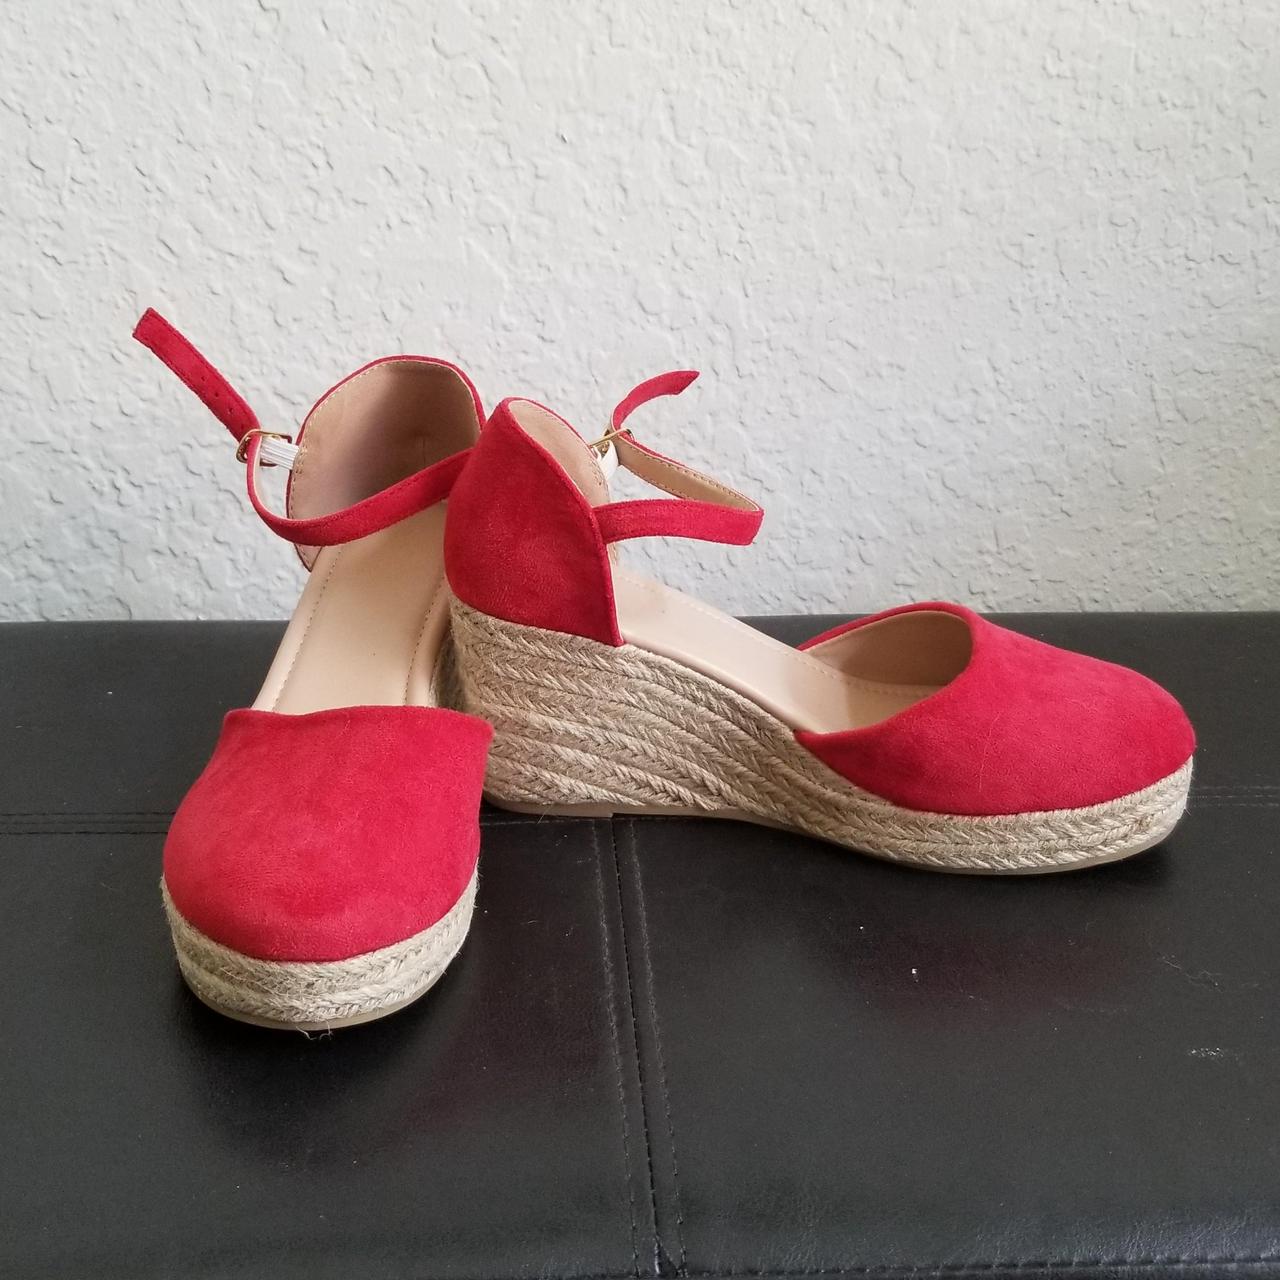 Selling these awesome pair of gently used red... - Depop